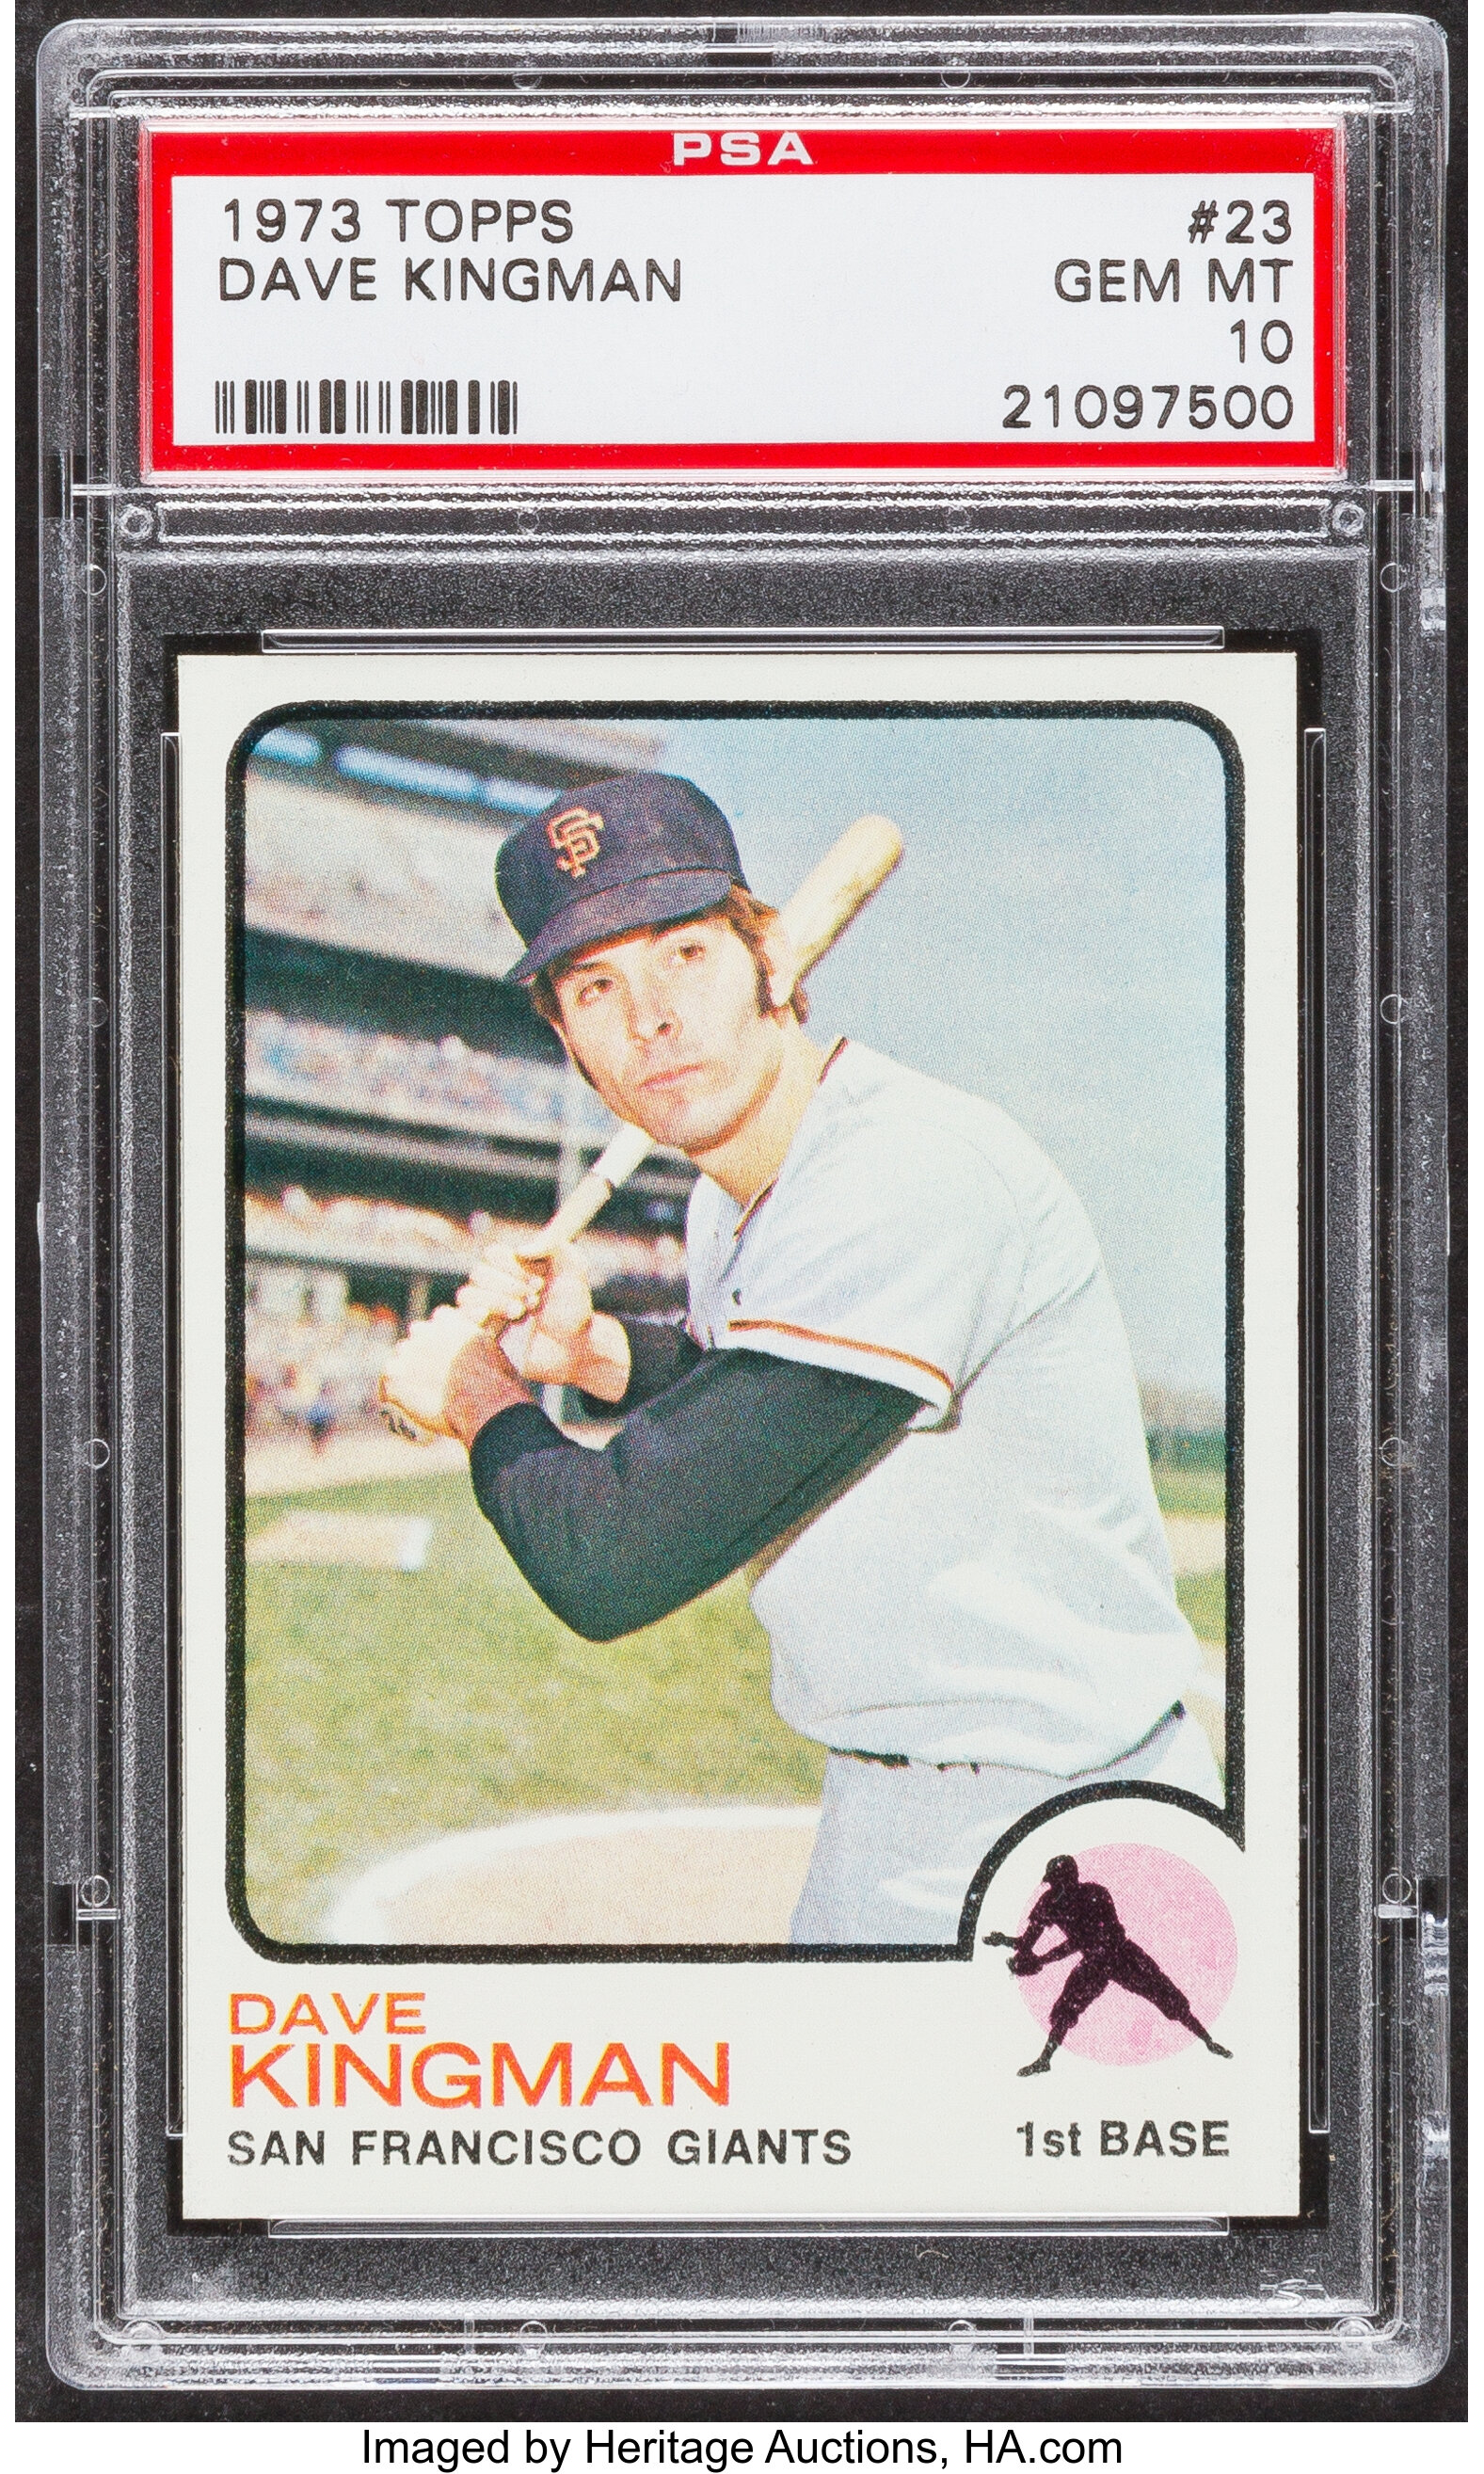 Sold at Auction: 1973 Topps Dave Kingman